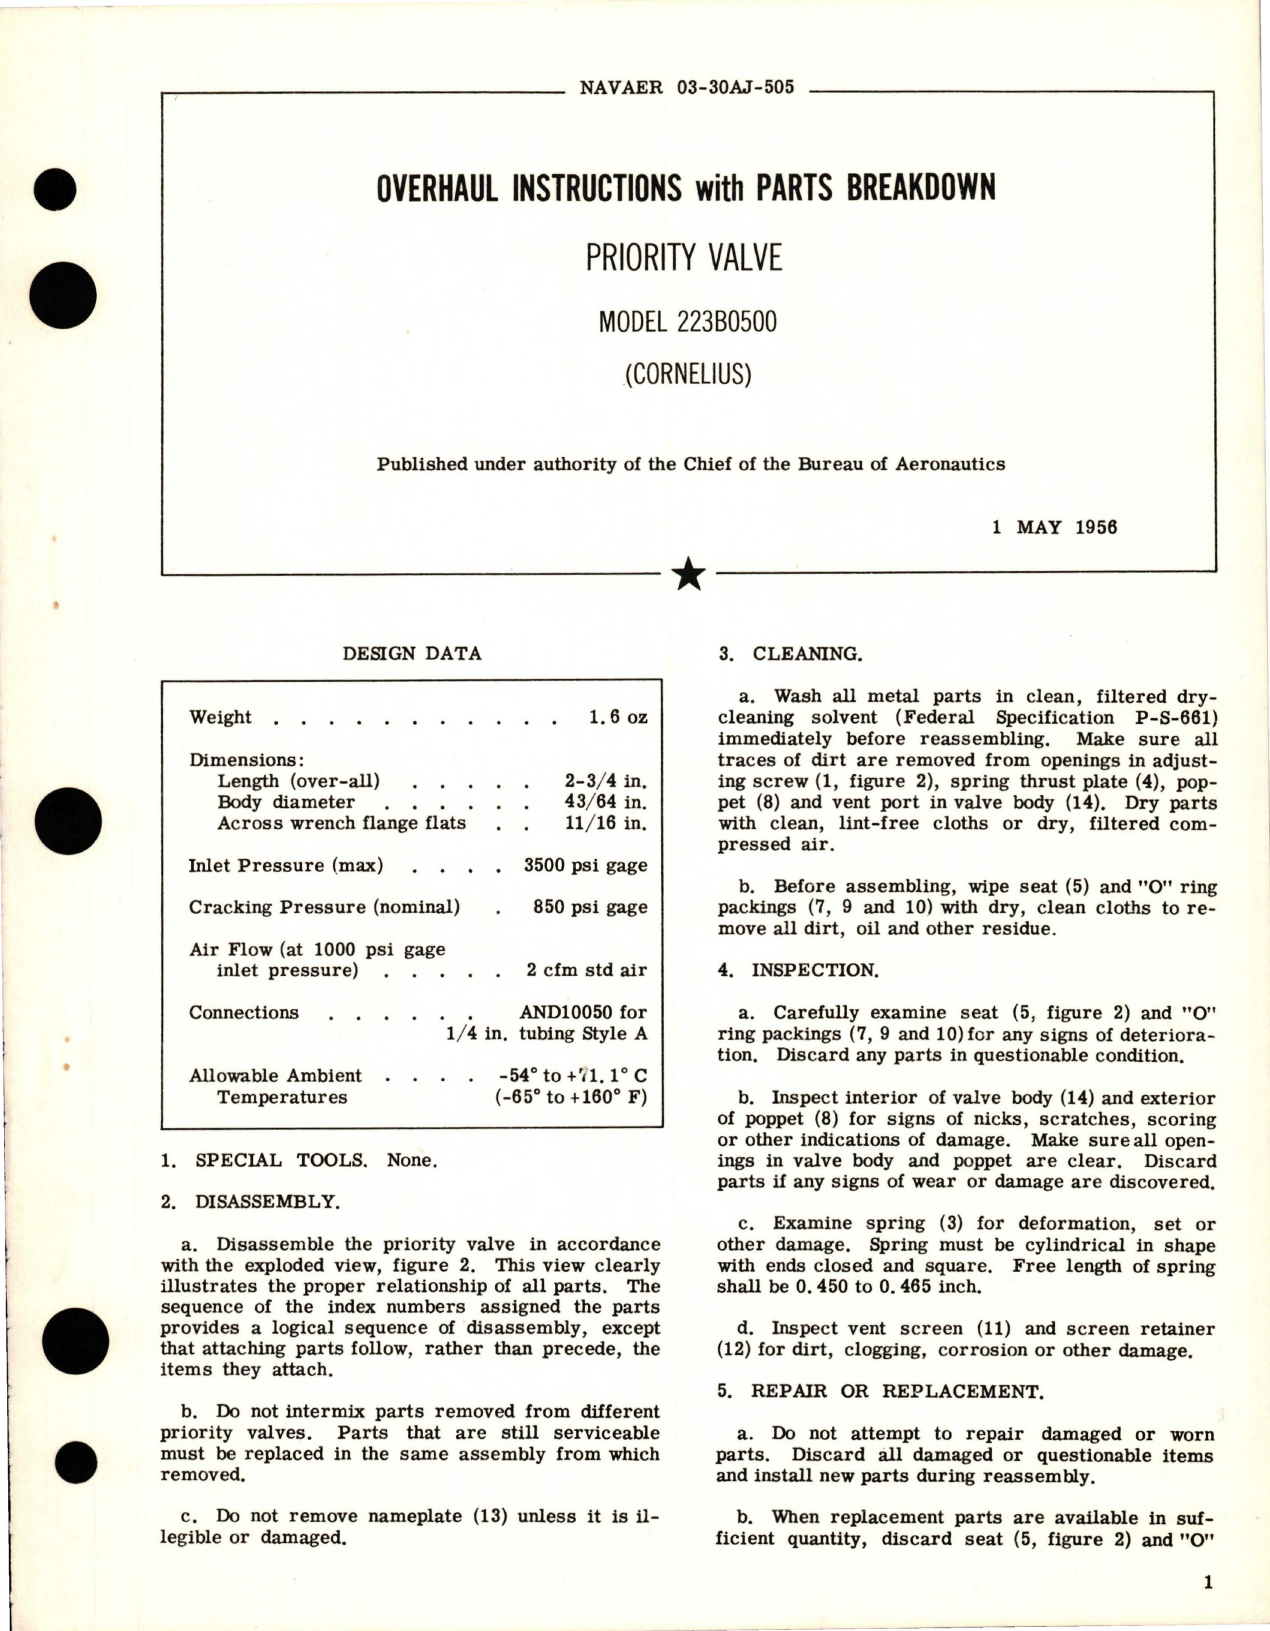 Sample page 1 from AirCorps Library document: Overhaul Instructions with Parts Breakdown for Priority Valve - Model 223B0500